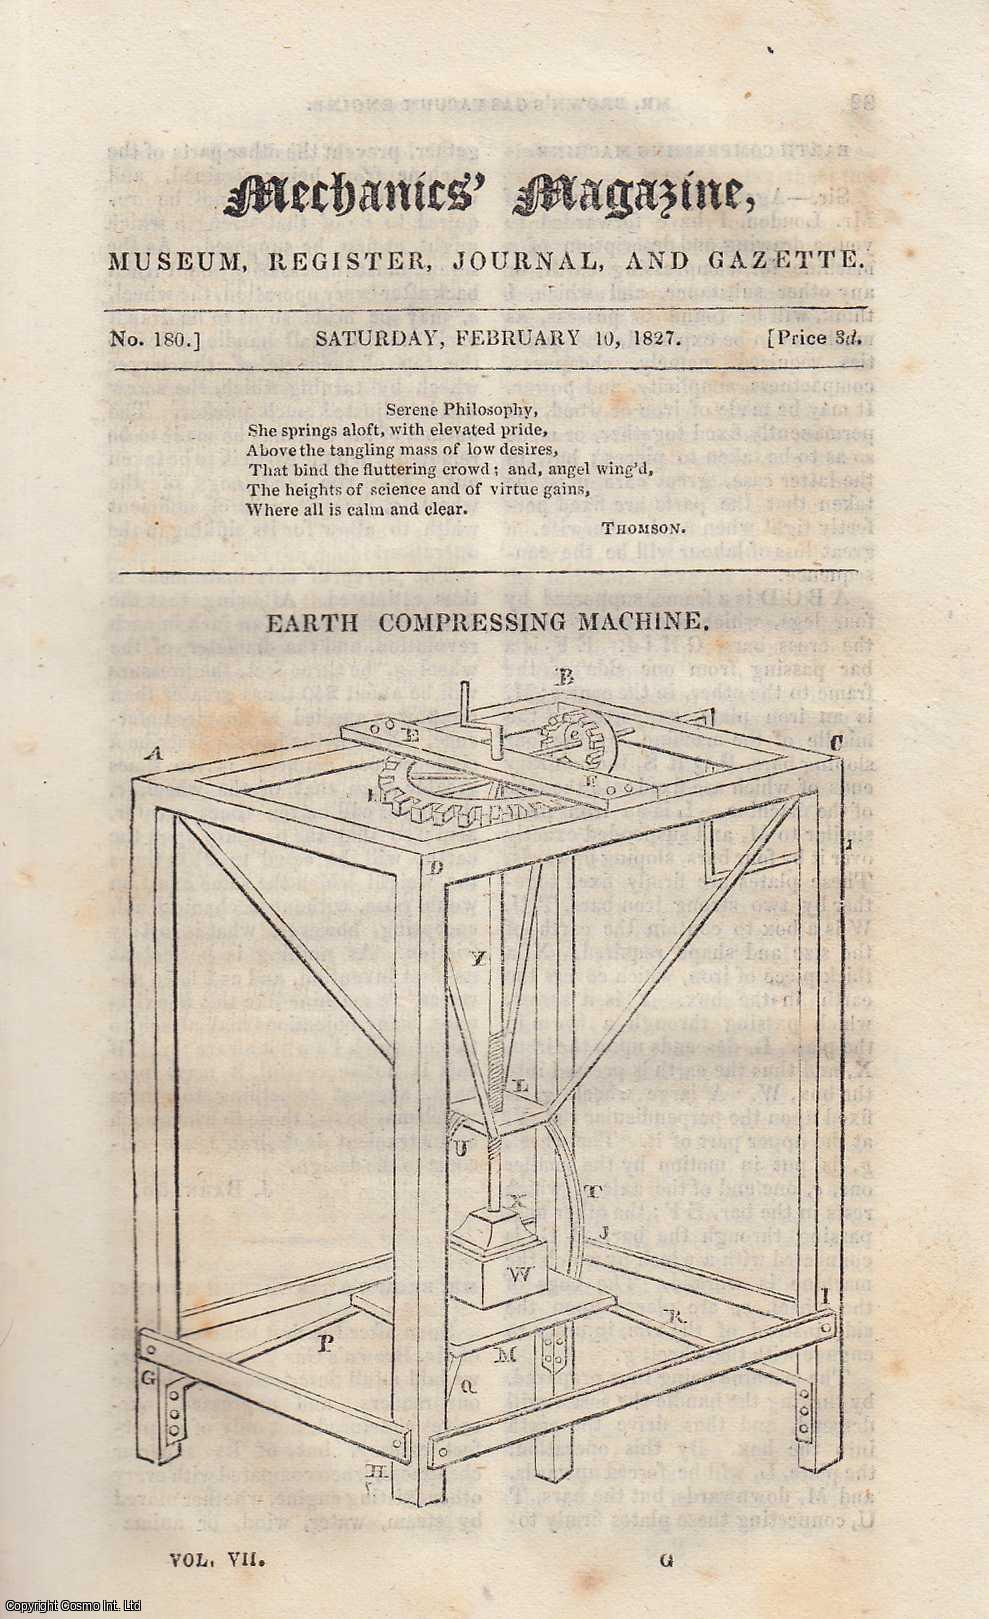 ---. - Earth Compressing Machine; Plan of a Floating Castle to go by Steam, and to Resist Balls; Apparatus For Steaming Vineries, etc. Mechanics Magazine, Museum, Register, Journal and Gazette. Issue No. 181. A complete rare weekly issue of the Mechanics' Magazine, 1827.